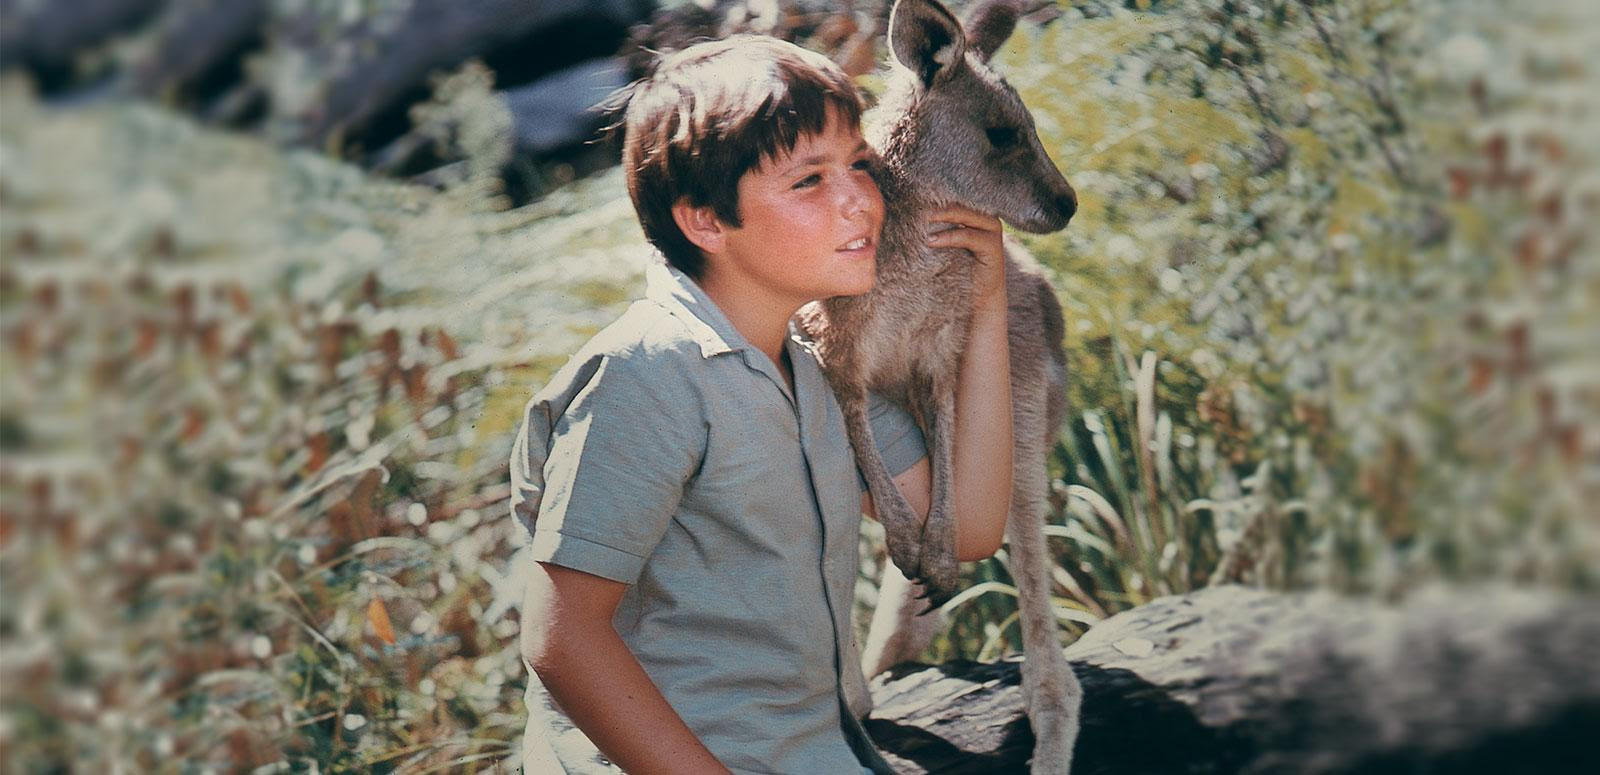 Sonny sits on a rock with Skippy the kangaroo's paws resting on his arm